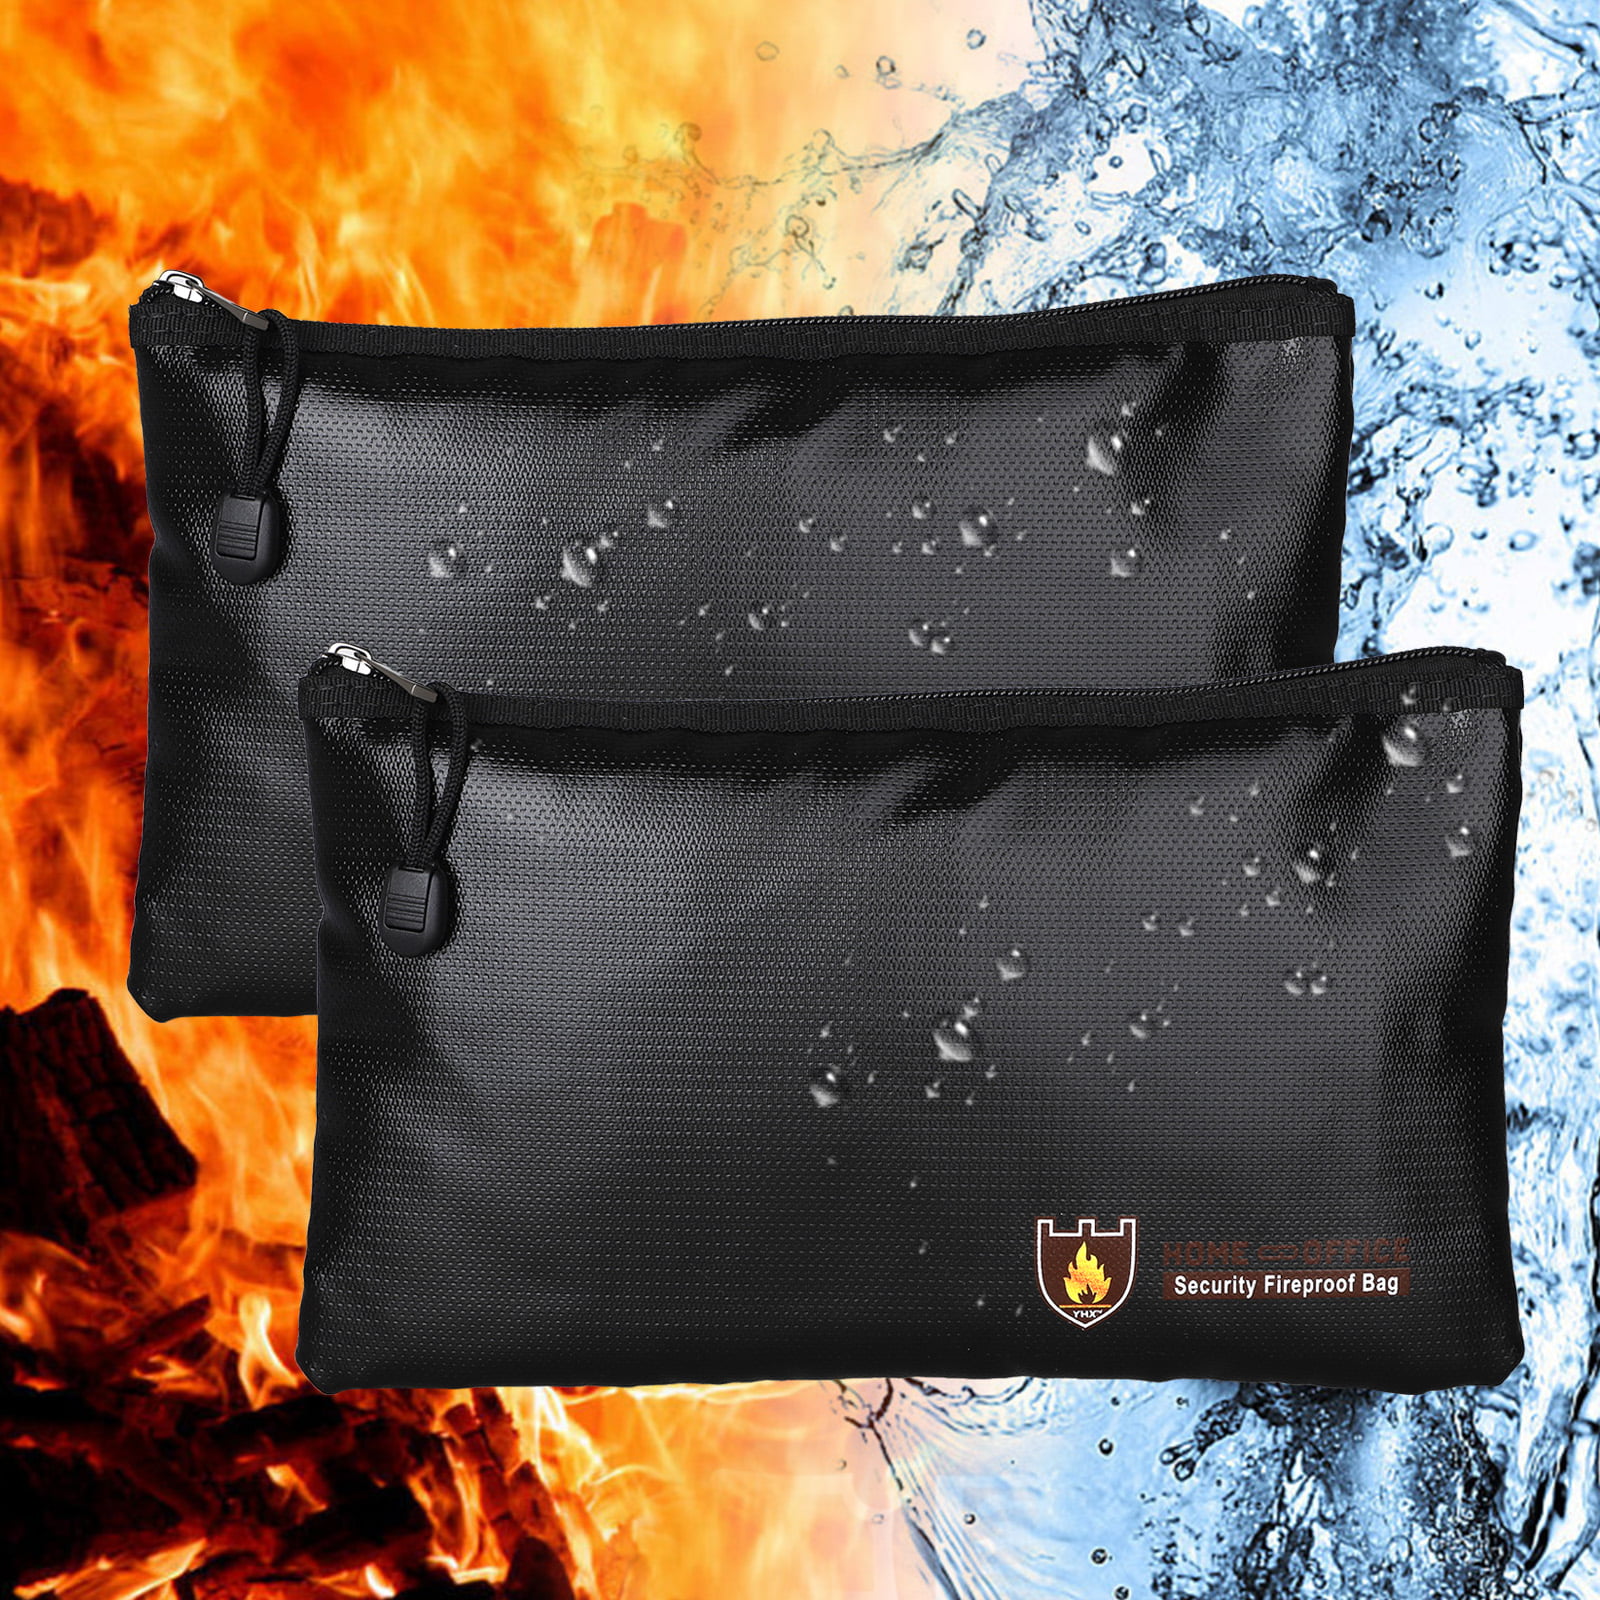 Zipper Closure Jewelry Black Yachieve Fireproof Document Bag,15 x 11 Non-Itchy Silicone Coated Fire Resistant Money Bag Fireproof Safe Storage for Money,Documents